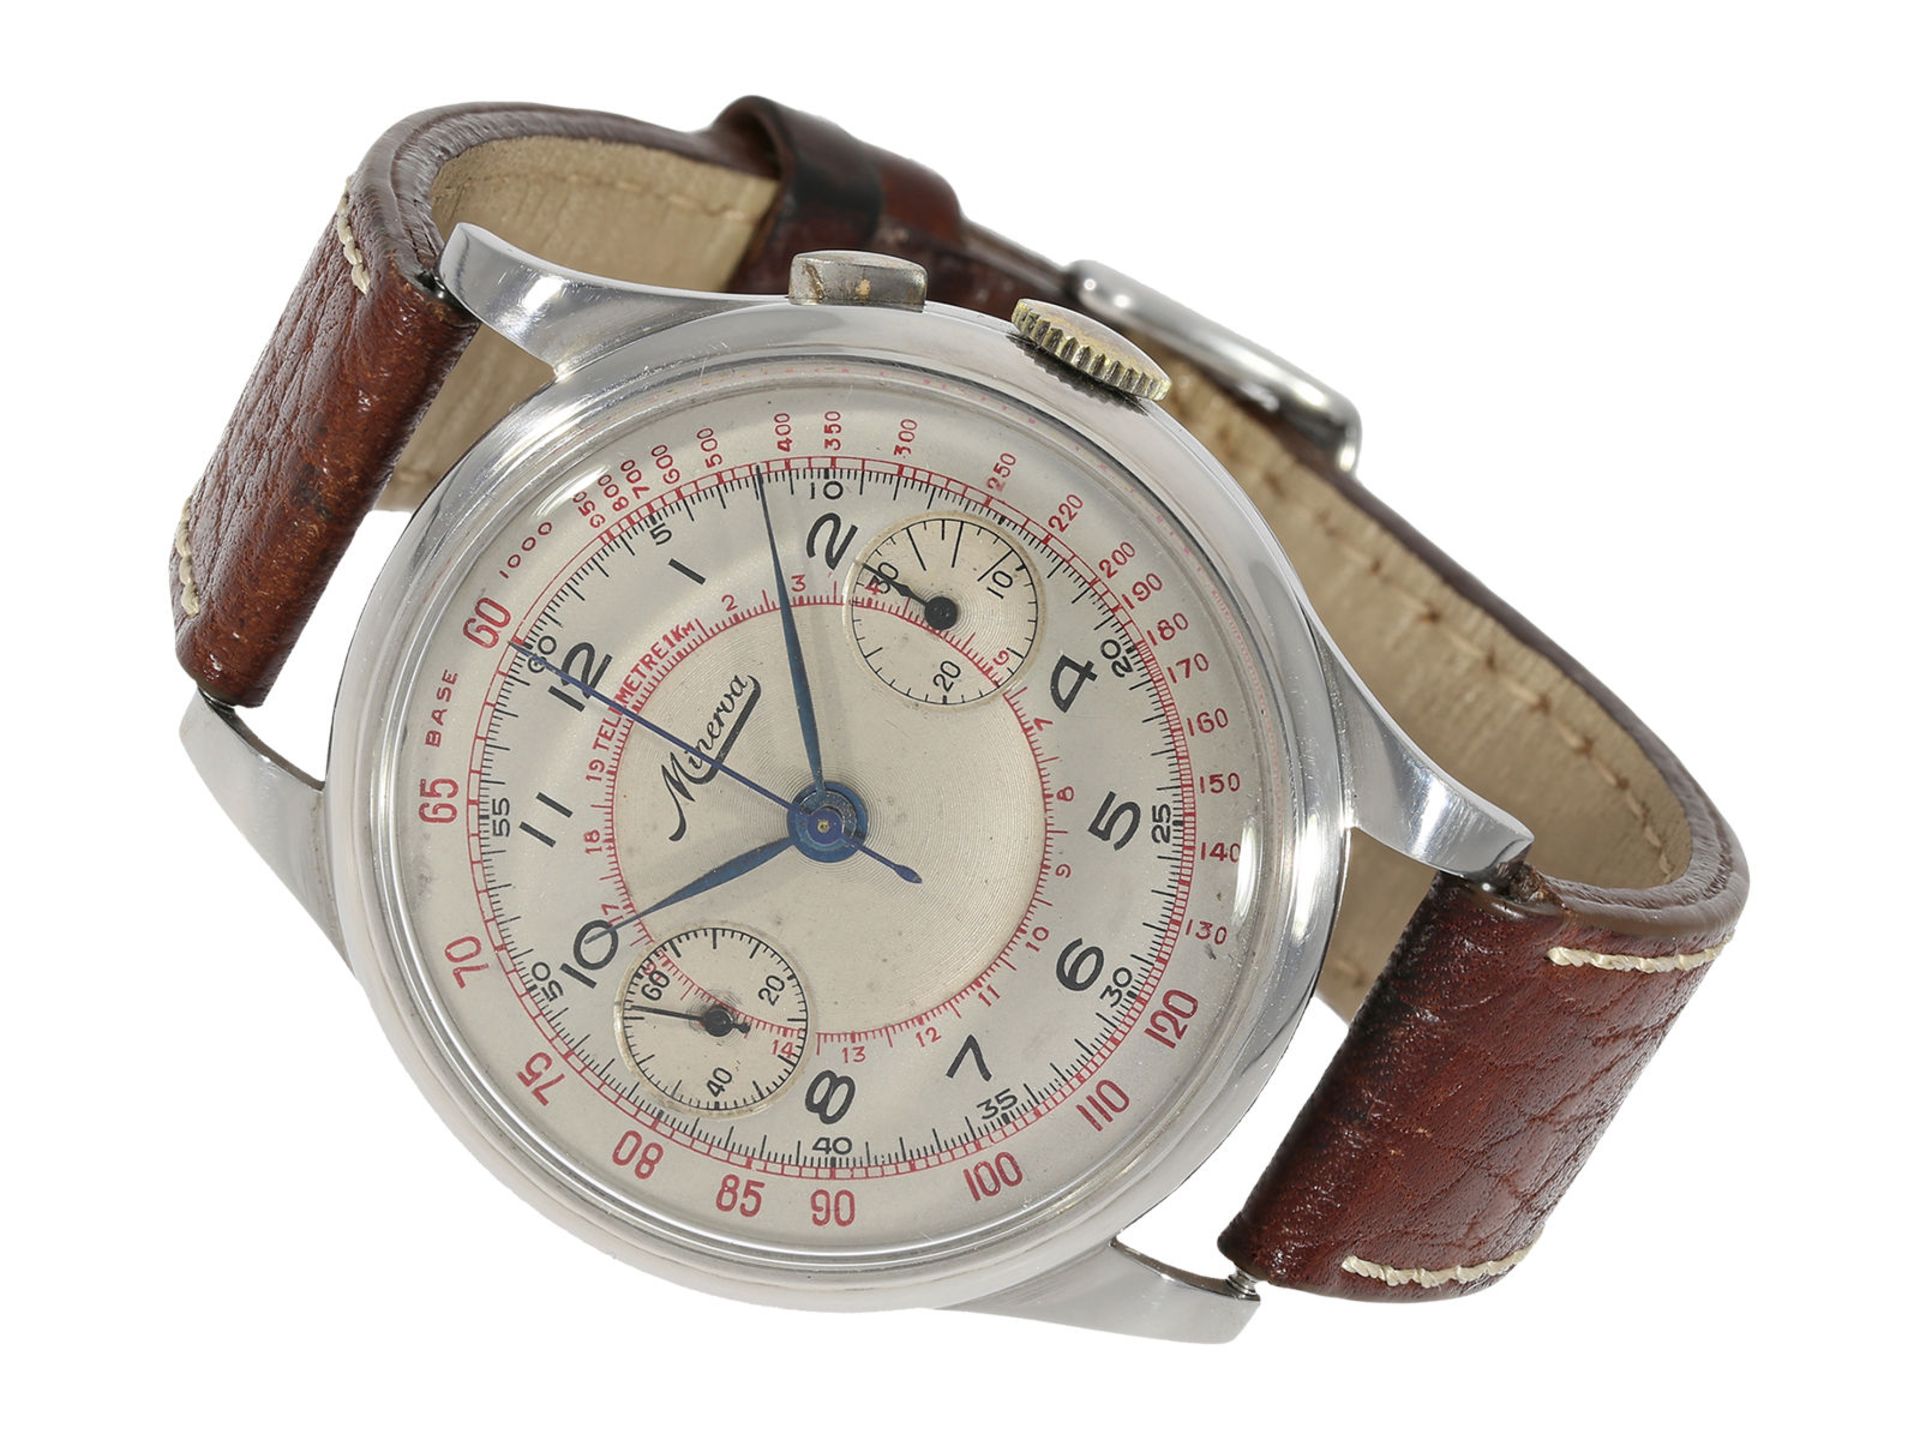 Wristwatch: extremely rare "oversize-42mm" Minerva steel chronograph, probably from the 30s.